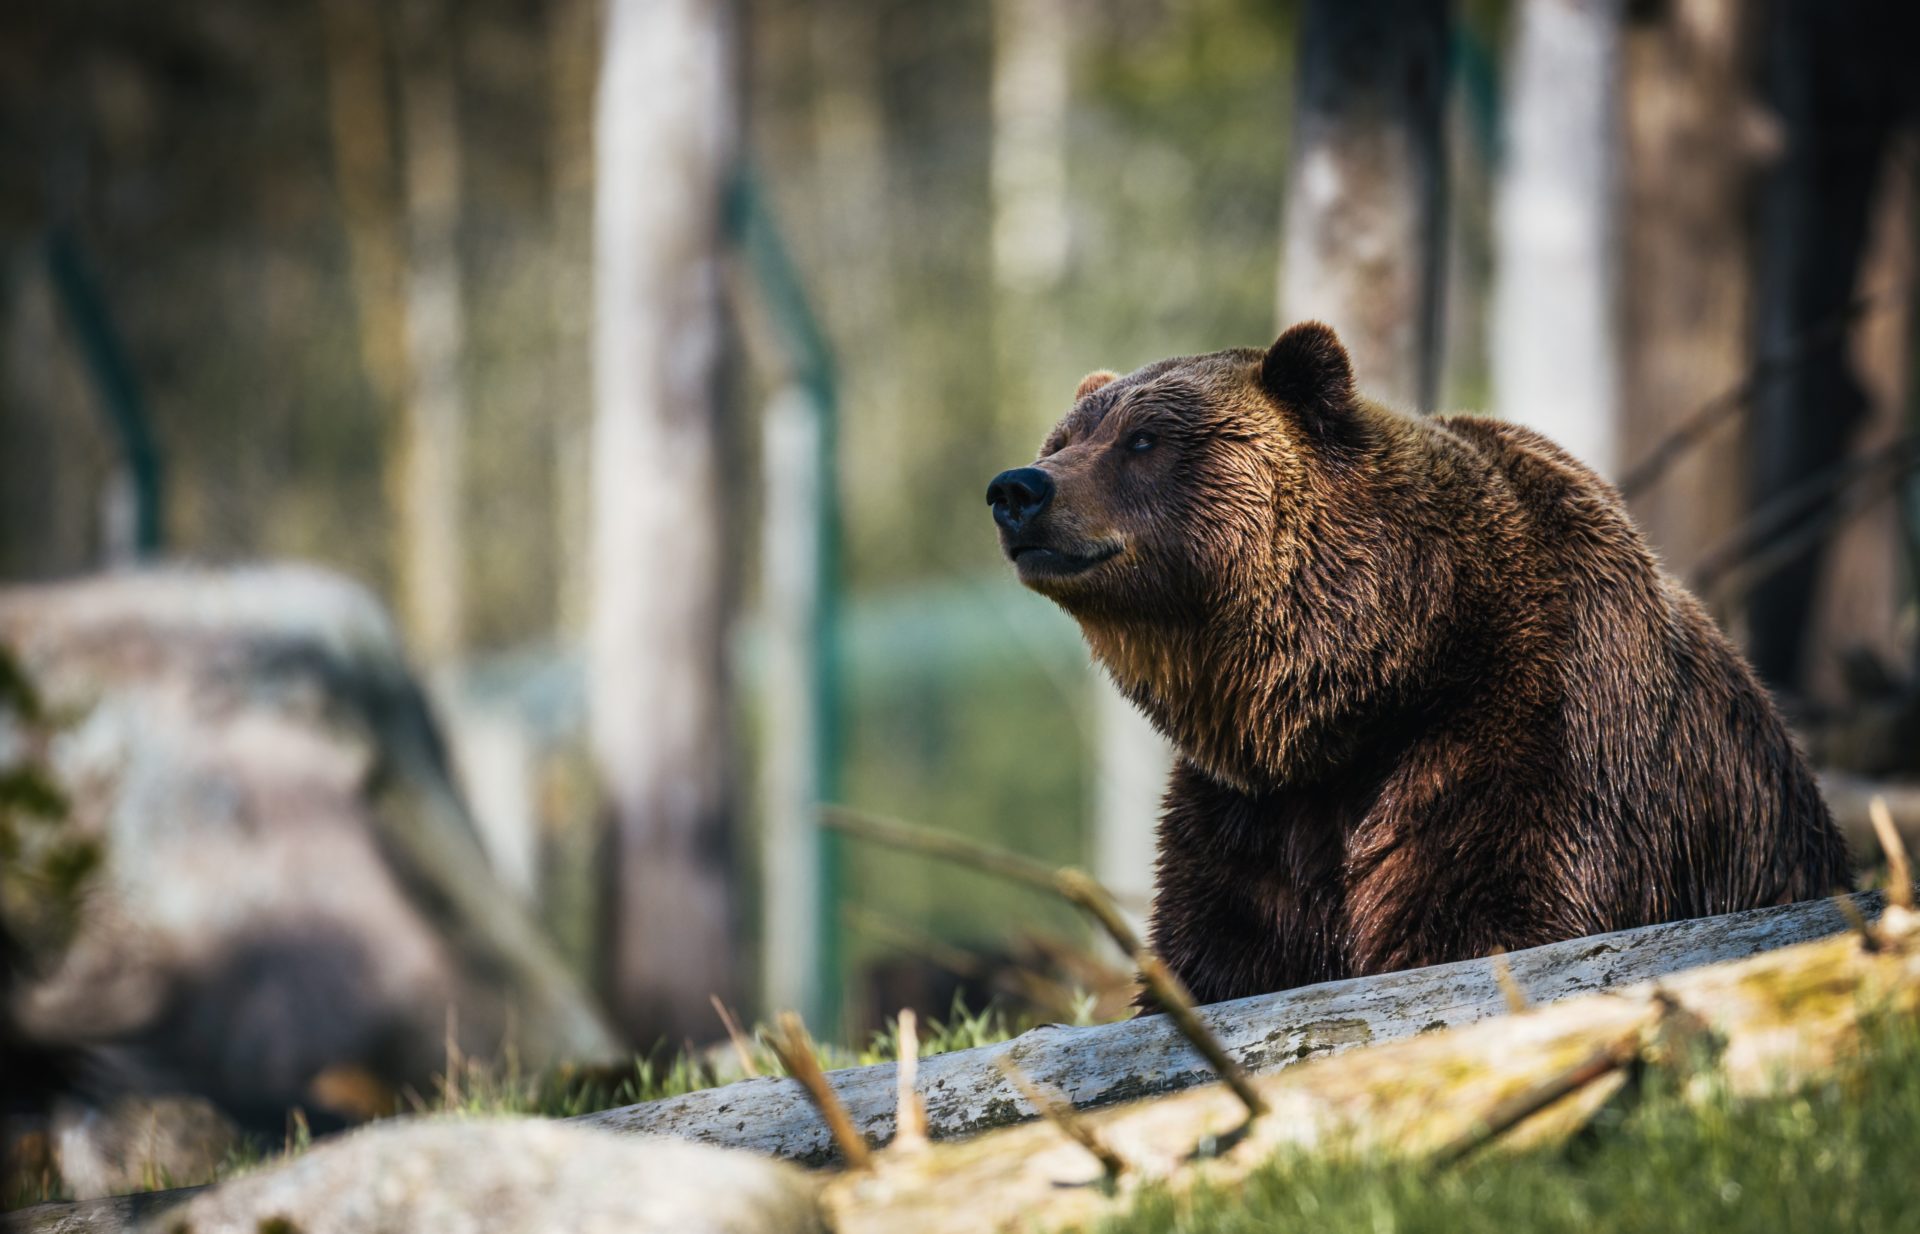 Prominent Investor: This Bitcoin Bear Season May Last For A While 13